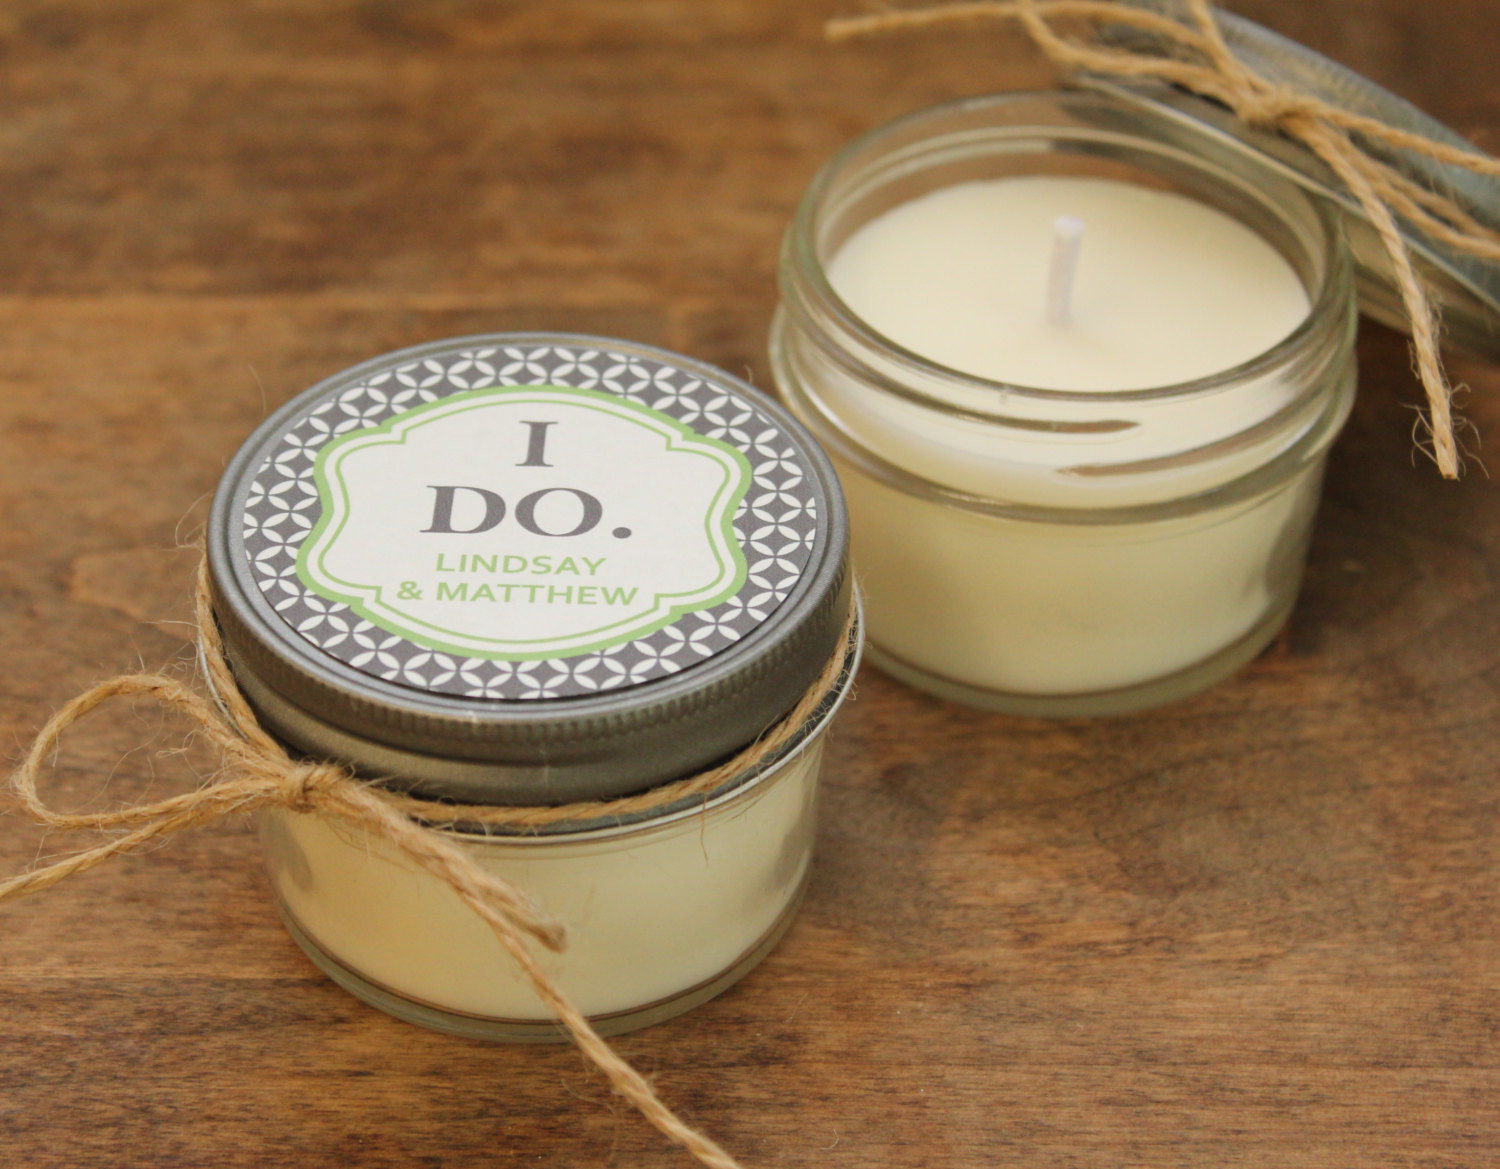 Wedding Candle Favors
 Set of 12 4 oz Soy Candle Wedding Favors I Do Label by